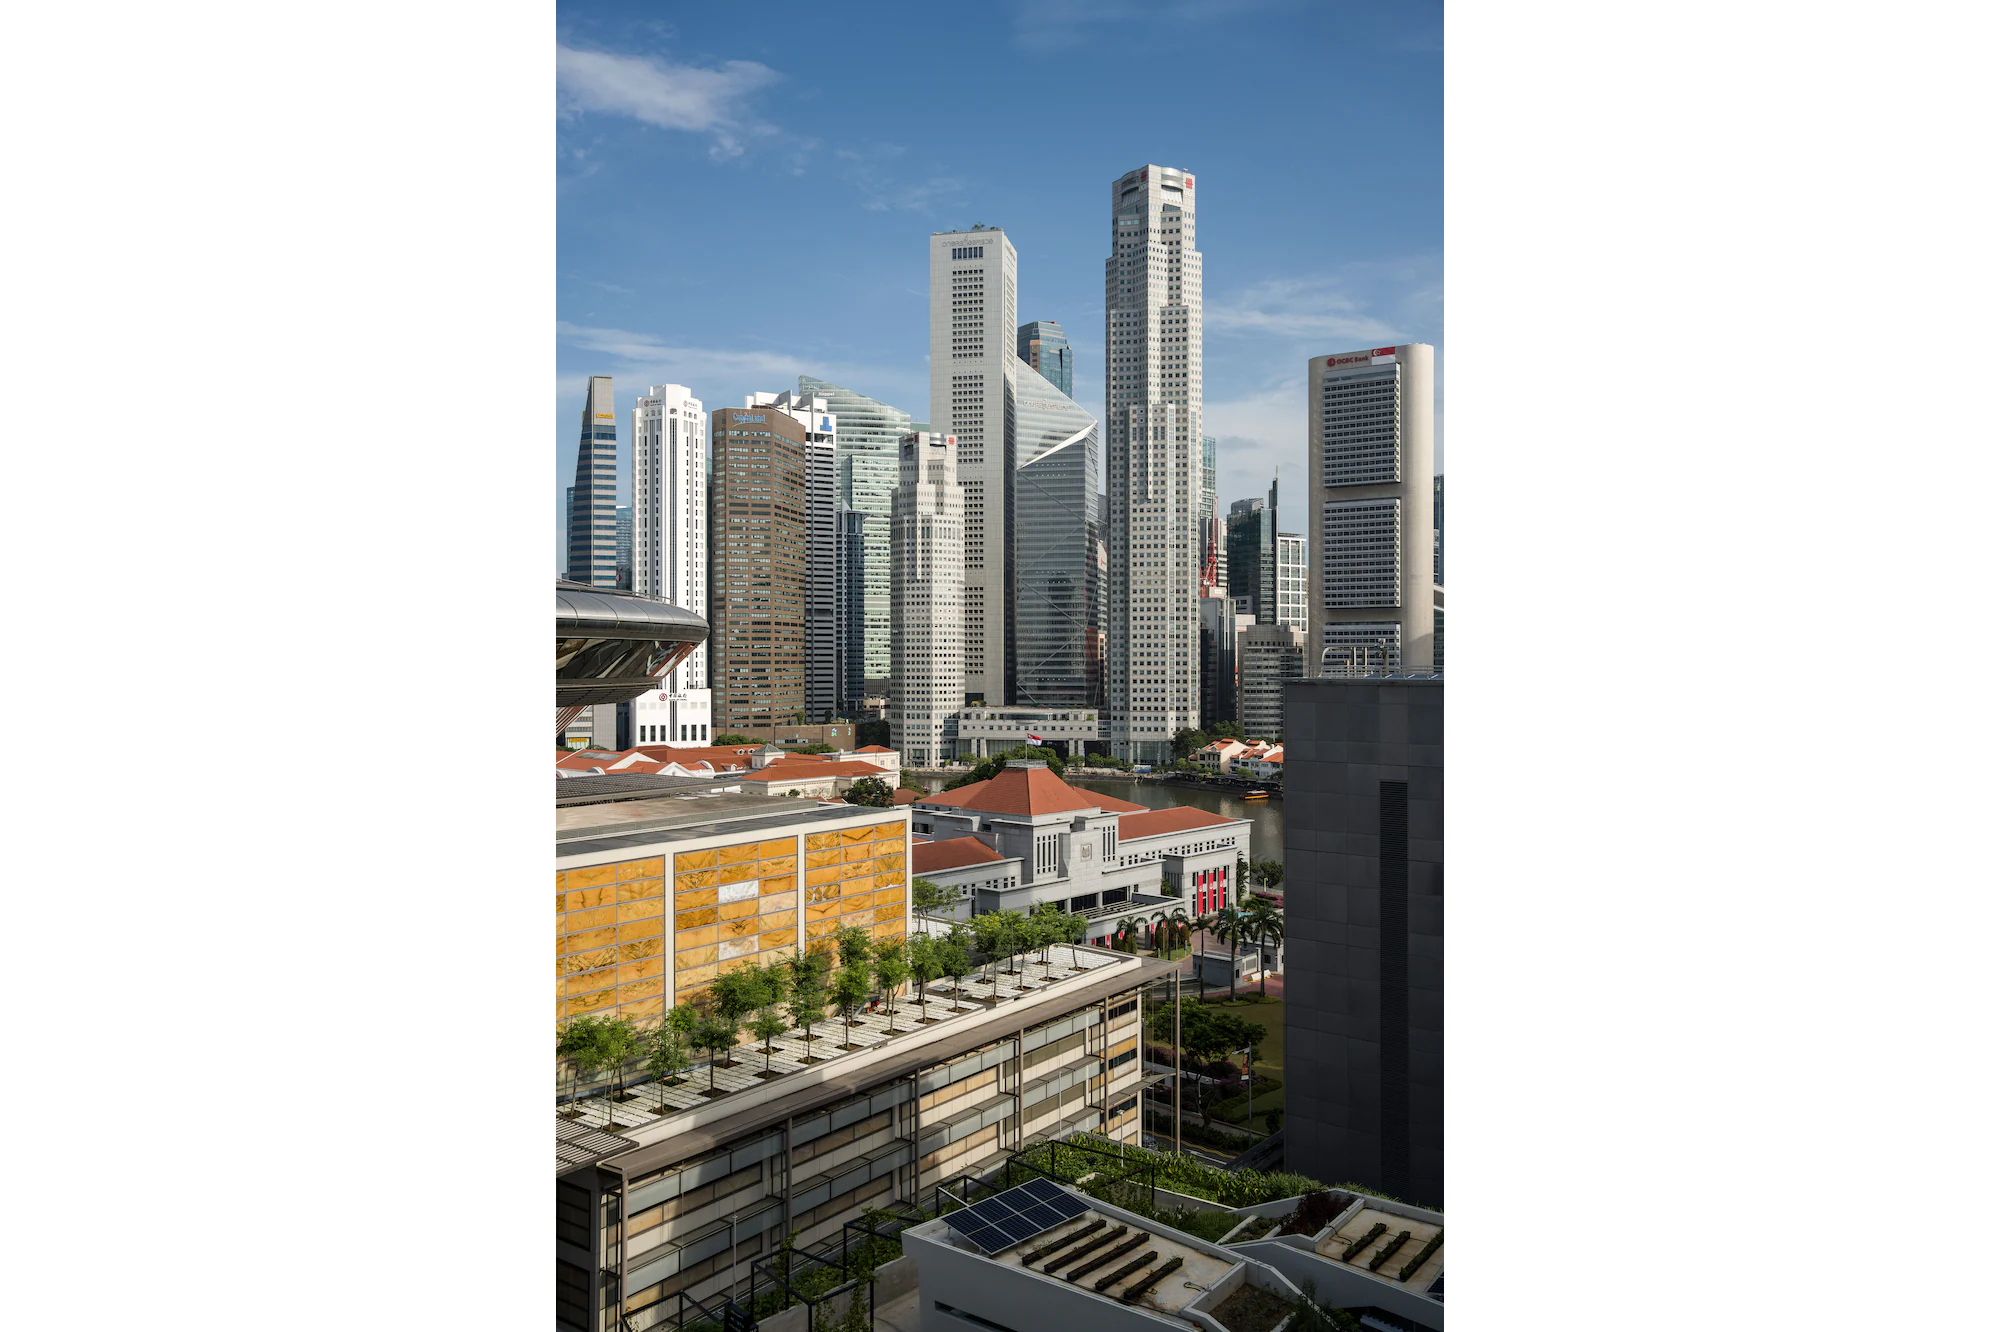 Sony 61-megapixel full frame Alpha 7R IV maximises superb resolution of view of Central Business District (CBD)